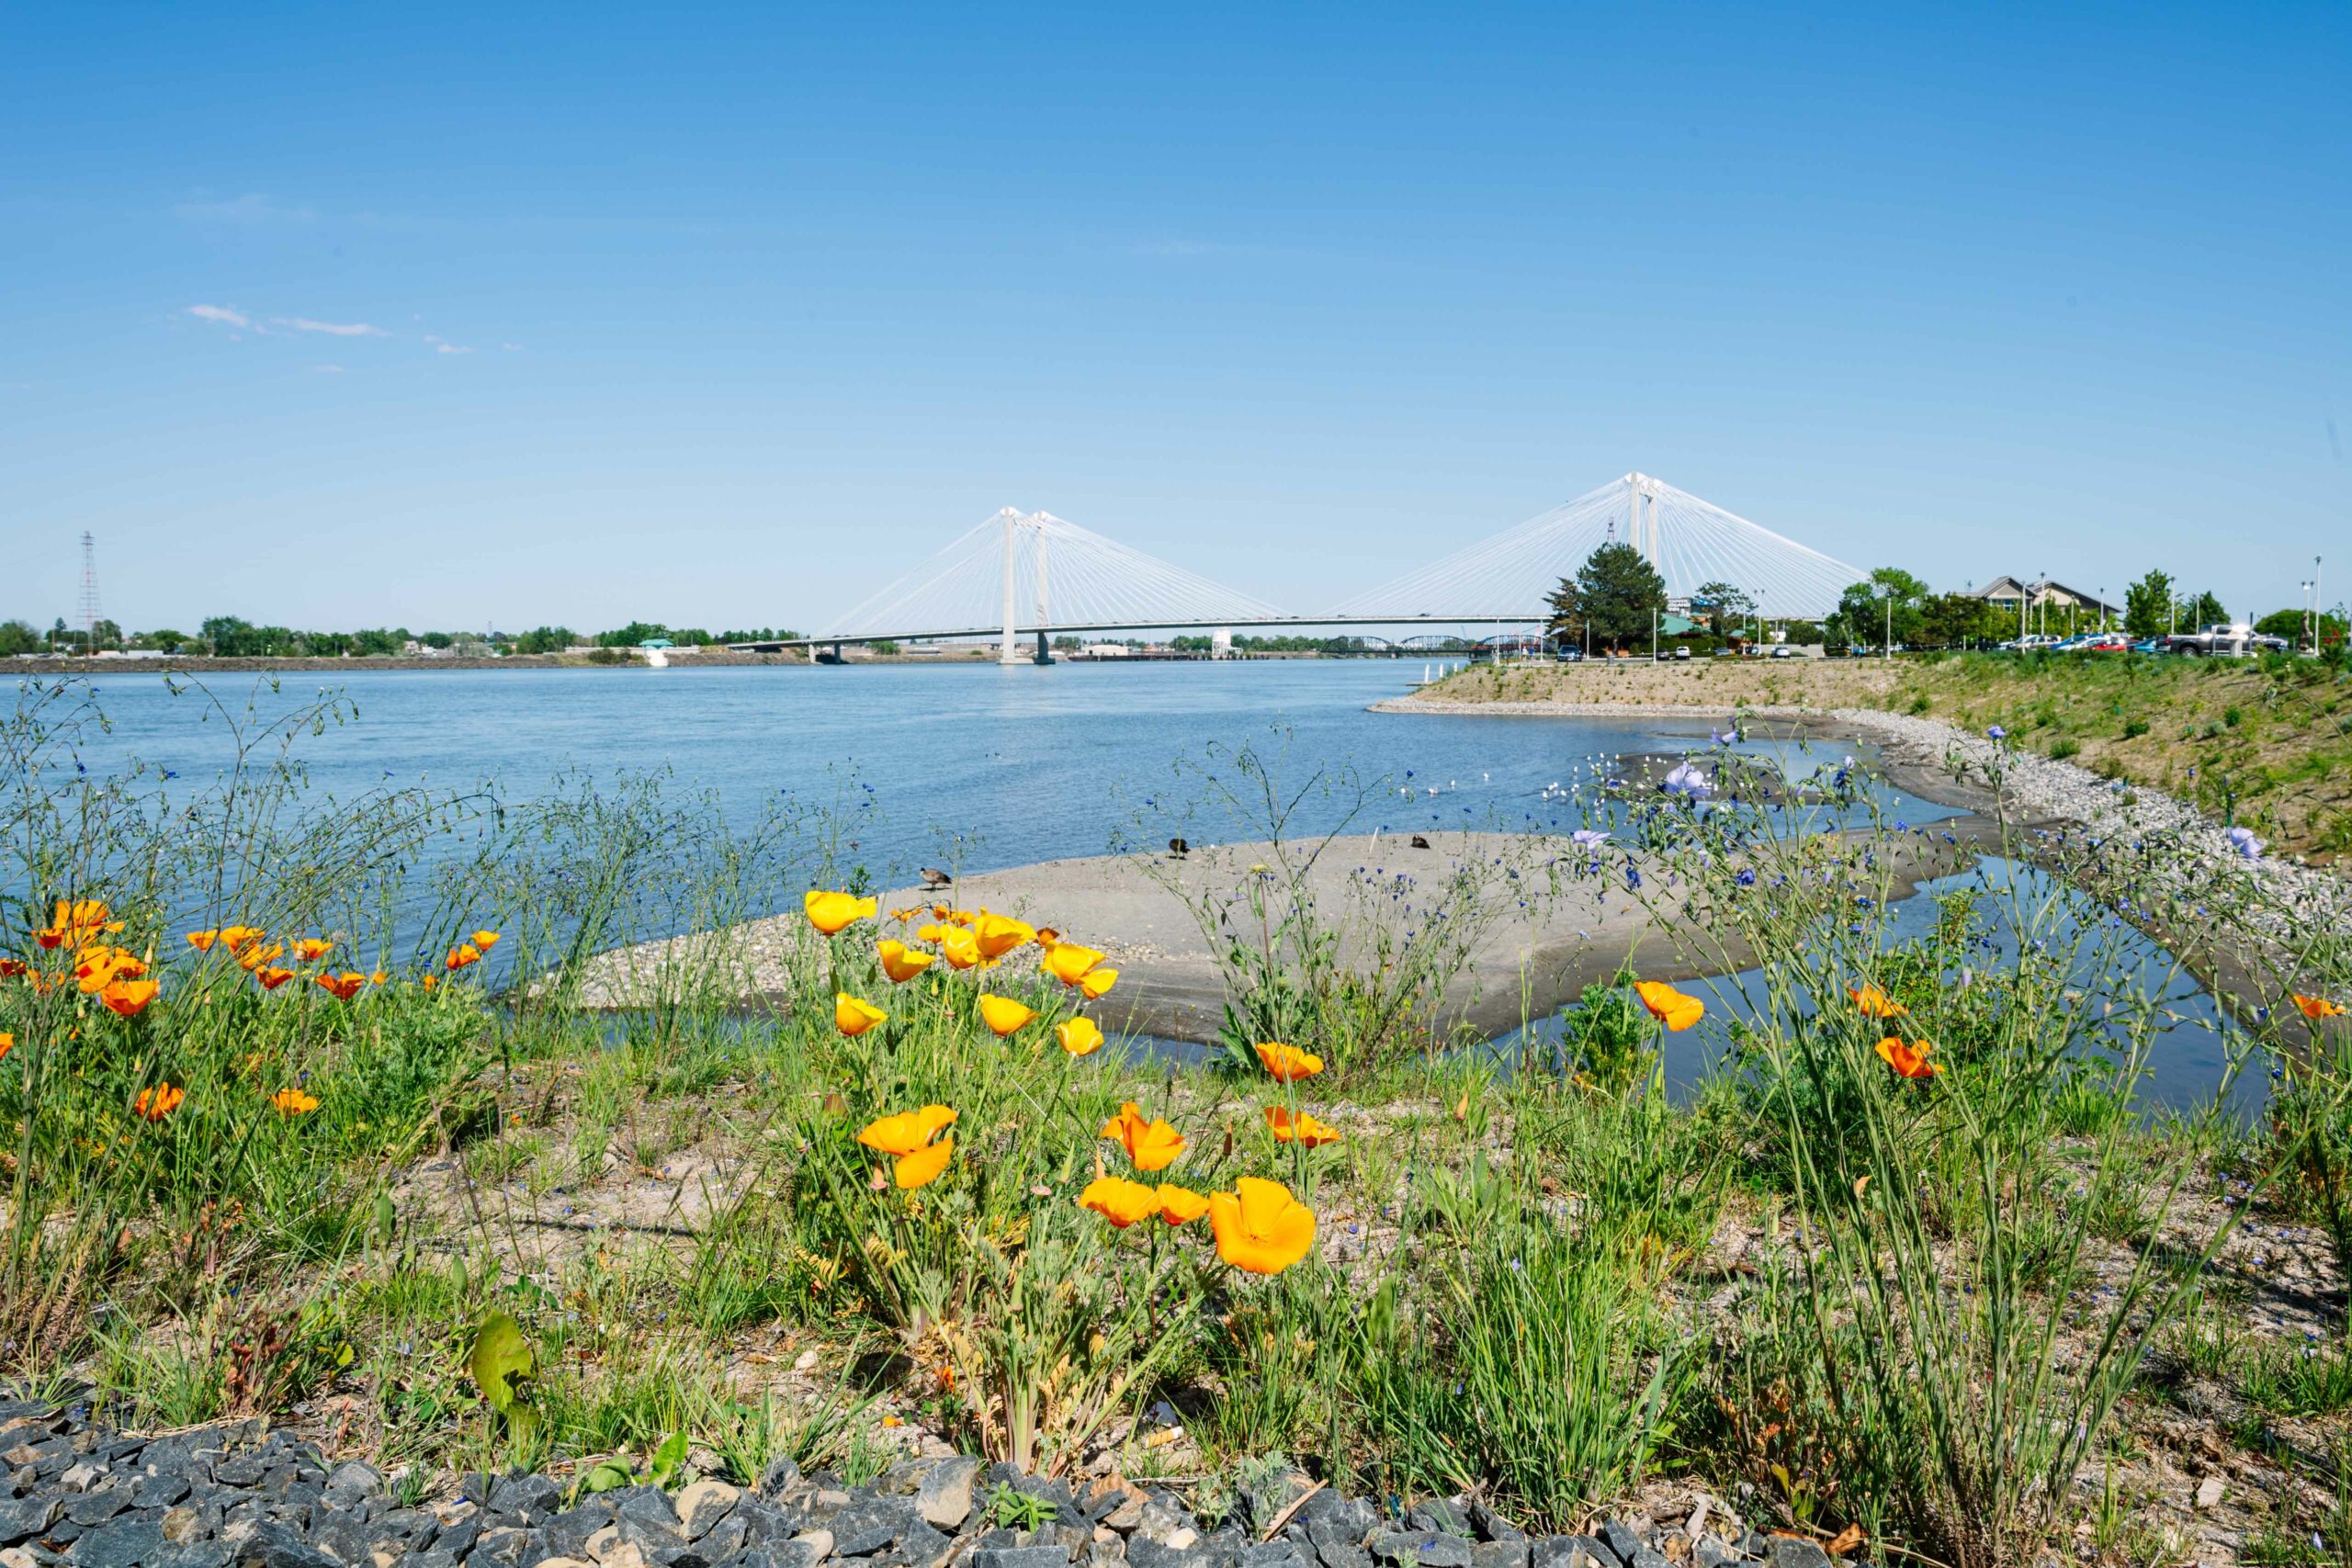 New flowers in bloom and other plants along the river shore and Clover Island "notch" area, which help stabilize the shoreline.